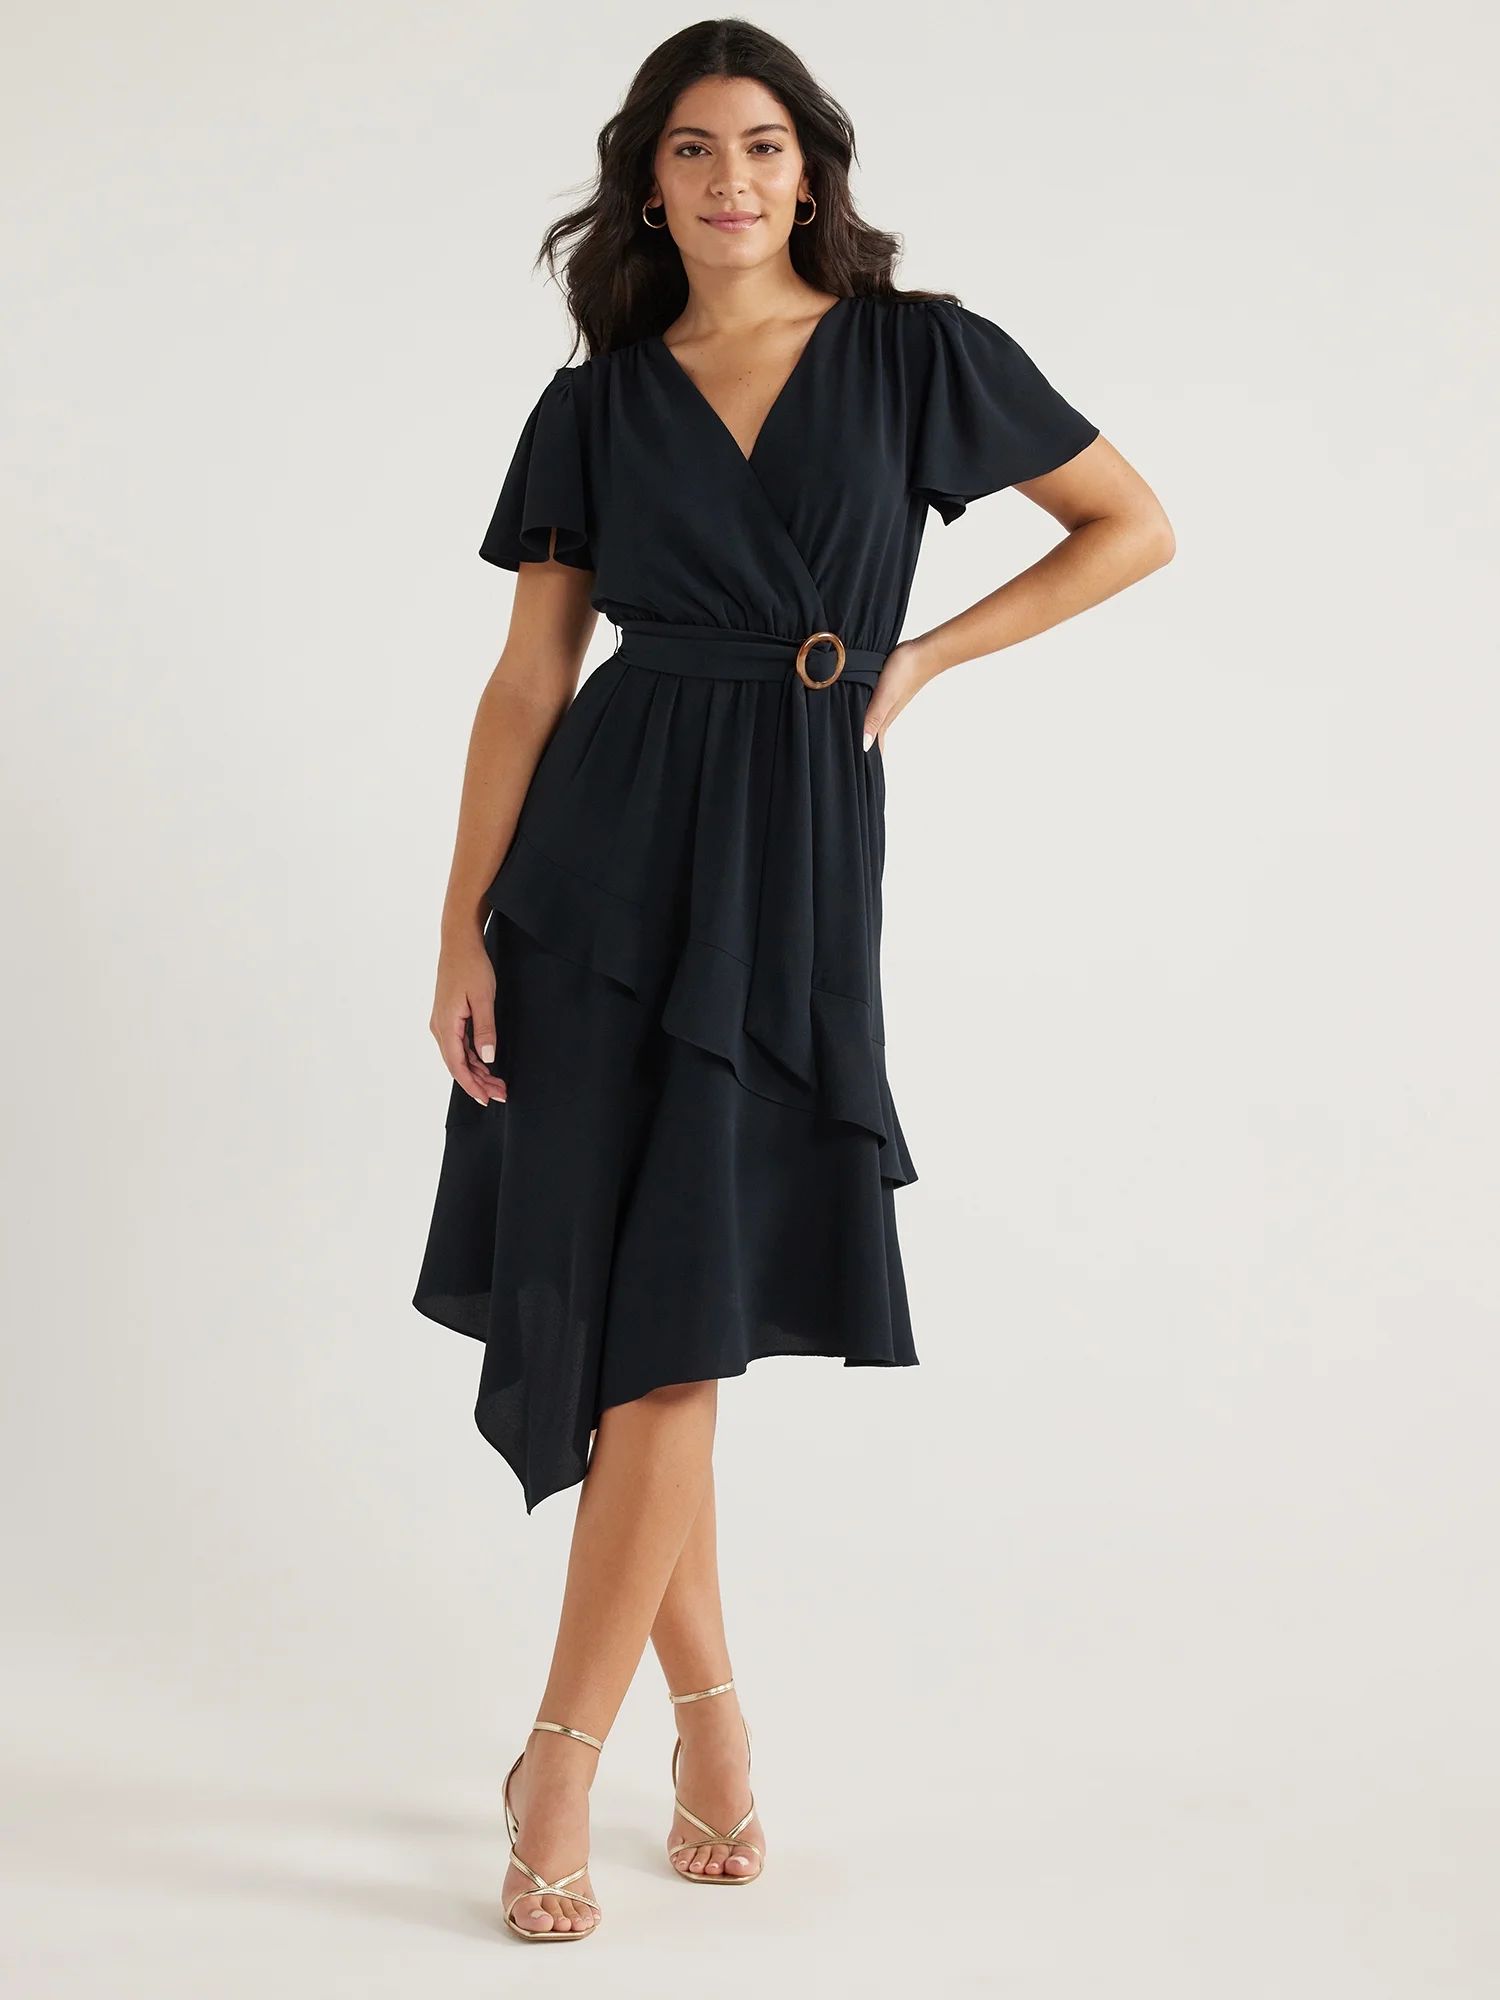 Sofia Jeans Women's and Women's Plus Faux Wrap Dress with Flutter Sleeves, Sizes XS-5X | Walmart (US)